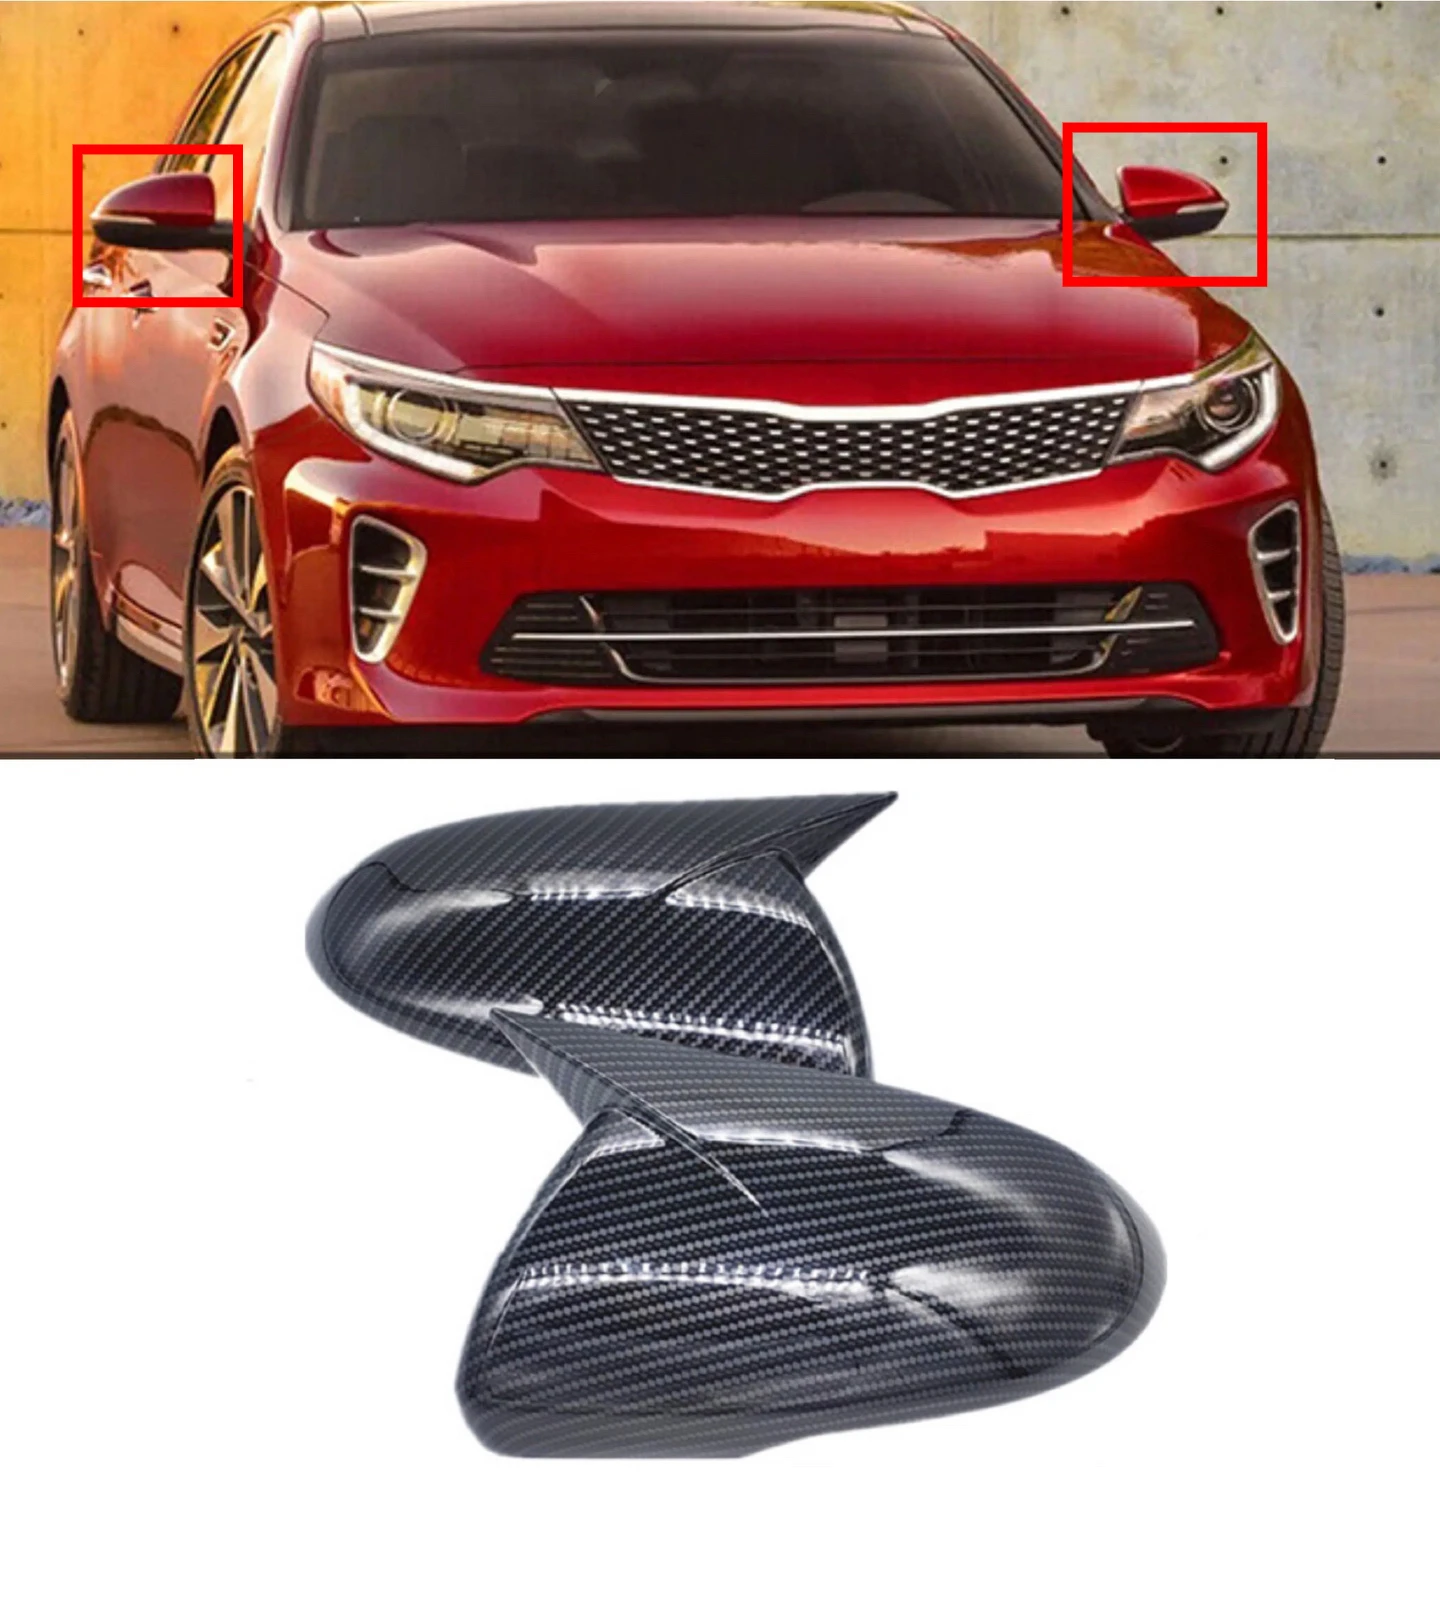 

Rearview Side Mirror Trim Cover For Kia k5 Optima 2016 2017 2018 2019 Shell Sticker Car Styling Accessories Auto Part